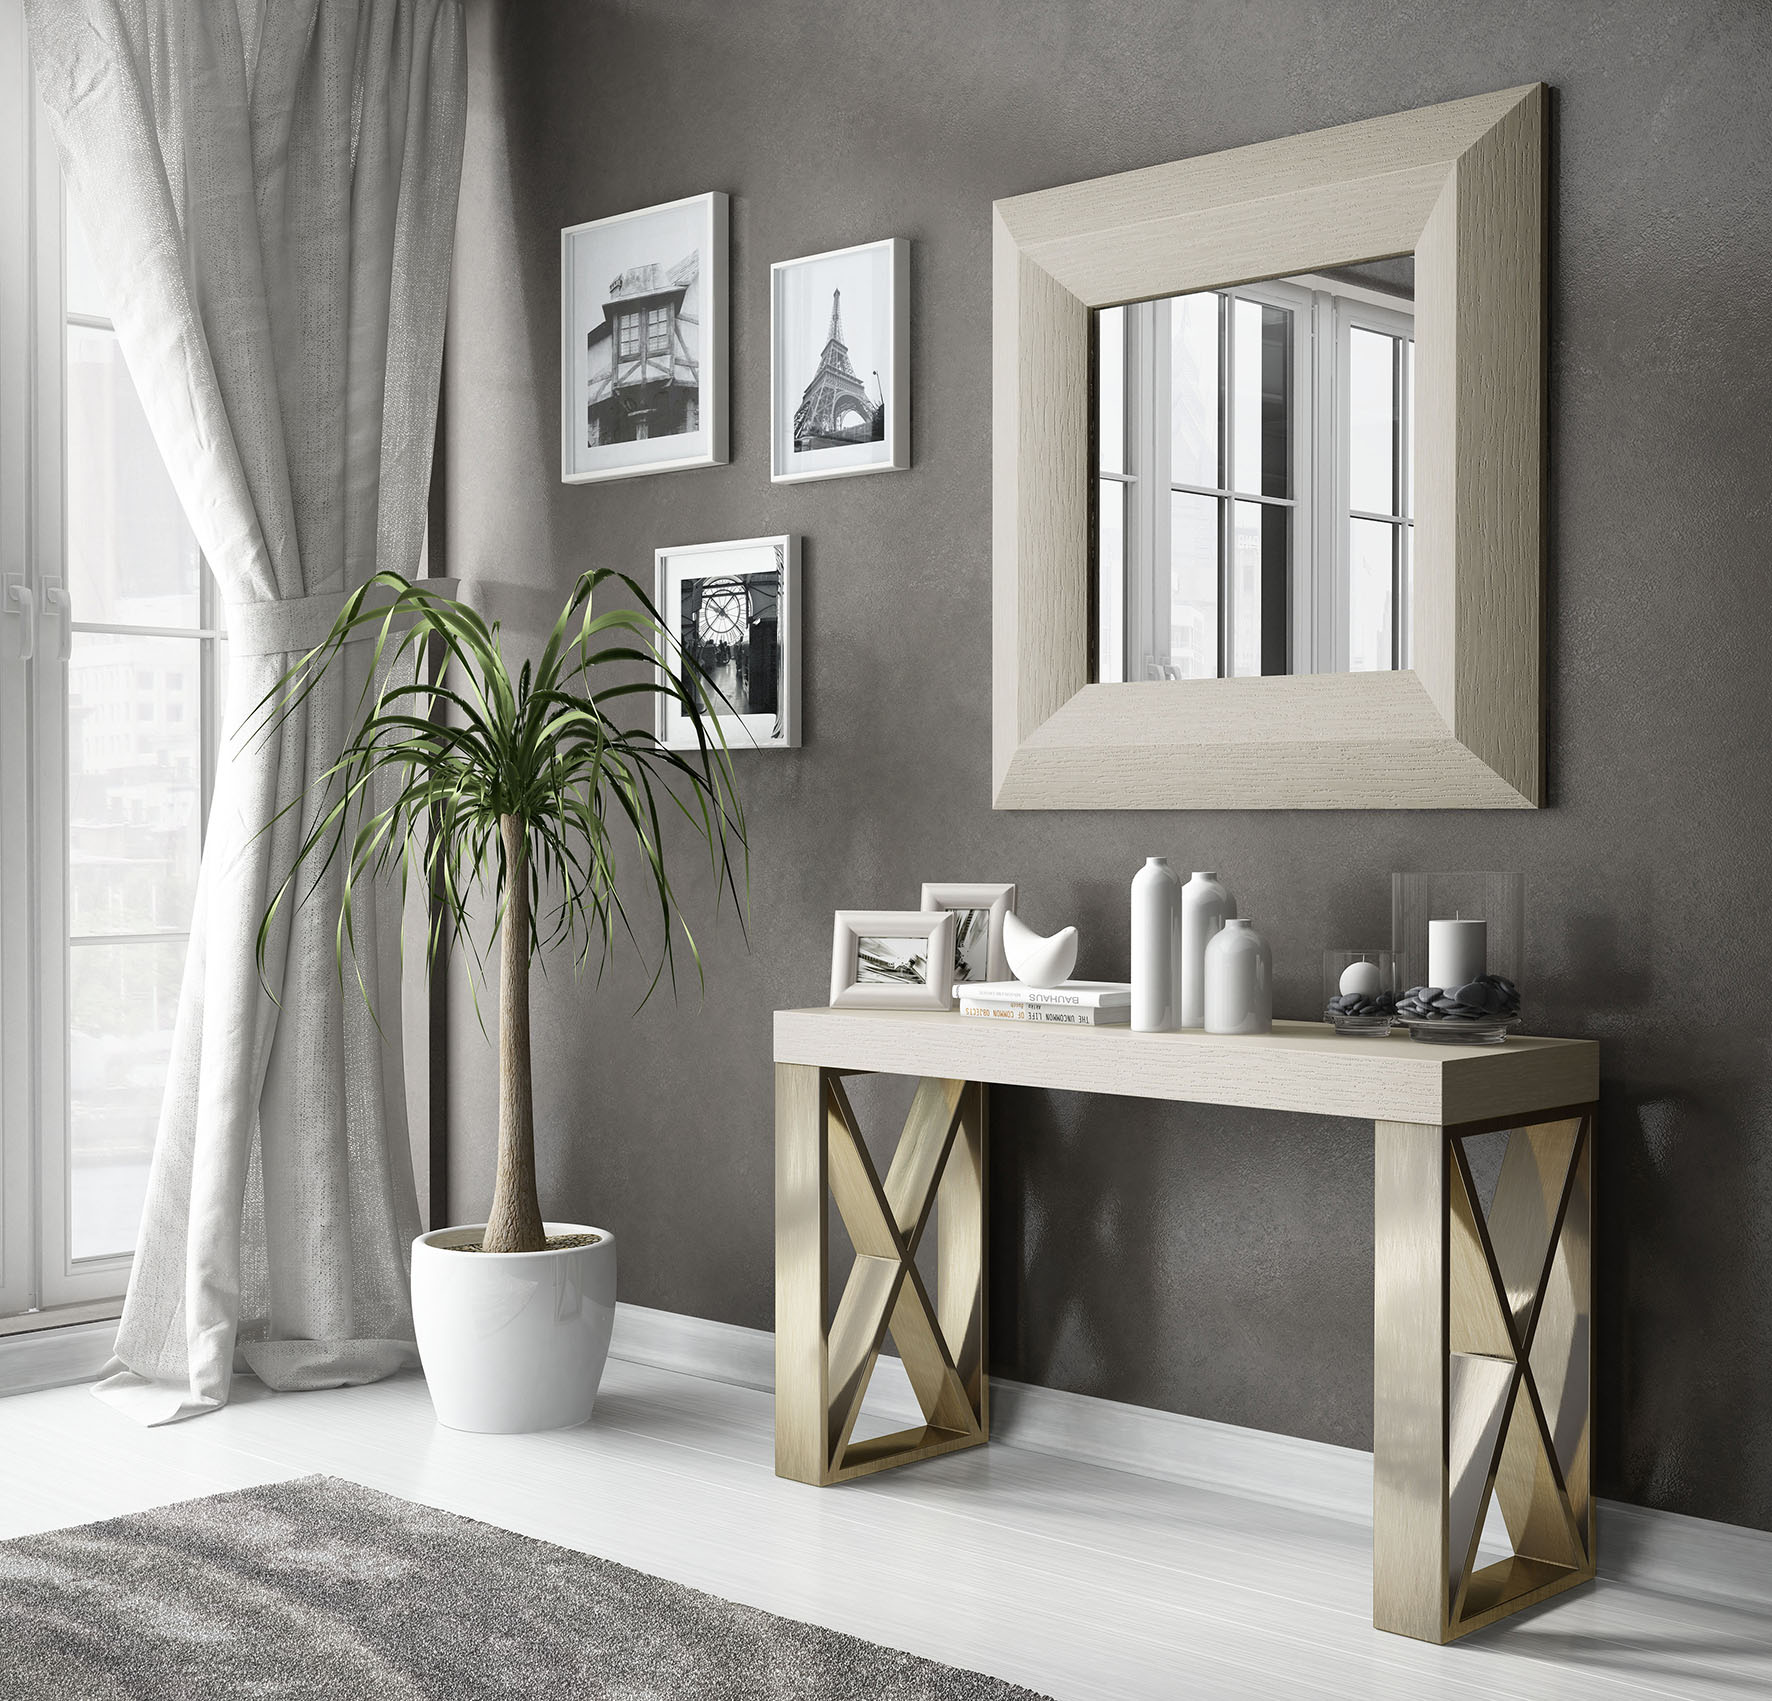 Brands MSC Modern Wall Unit, Italy CII.40 Console Table